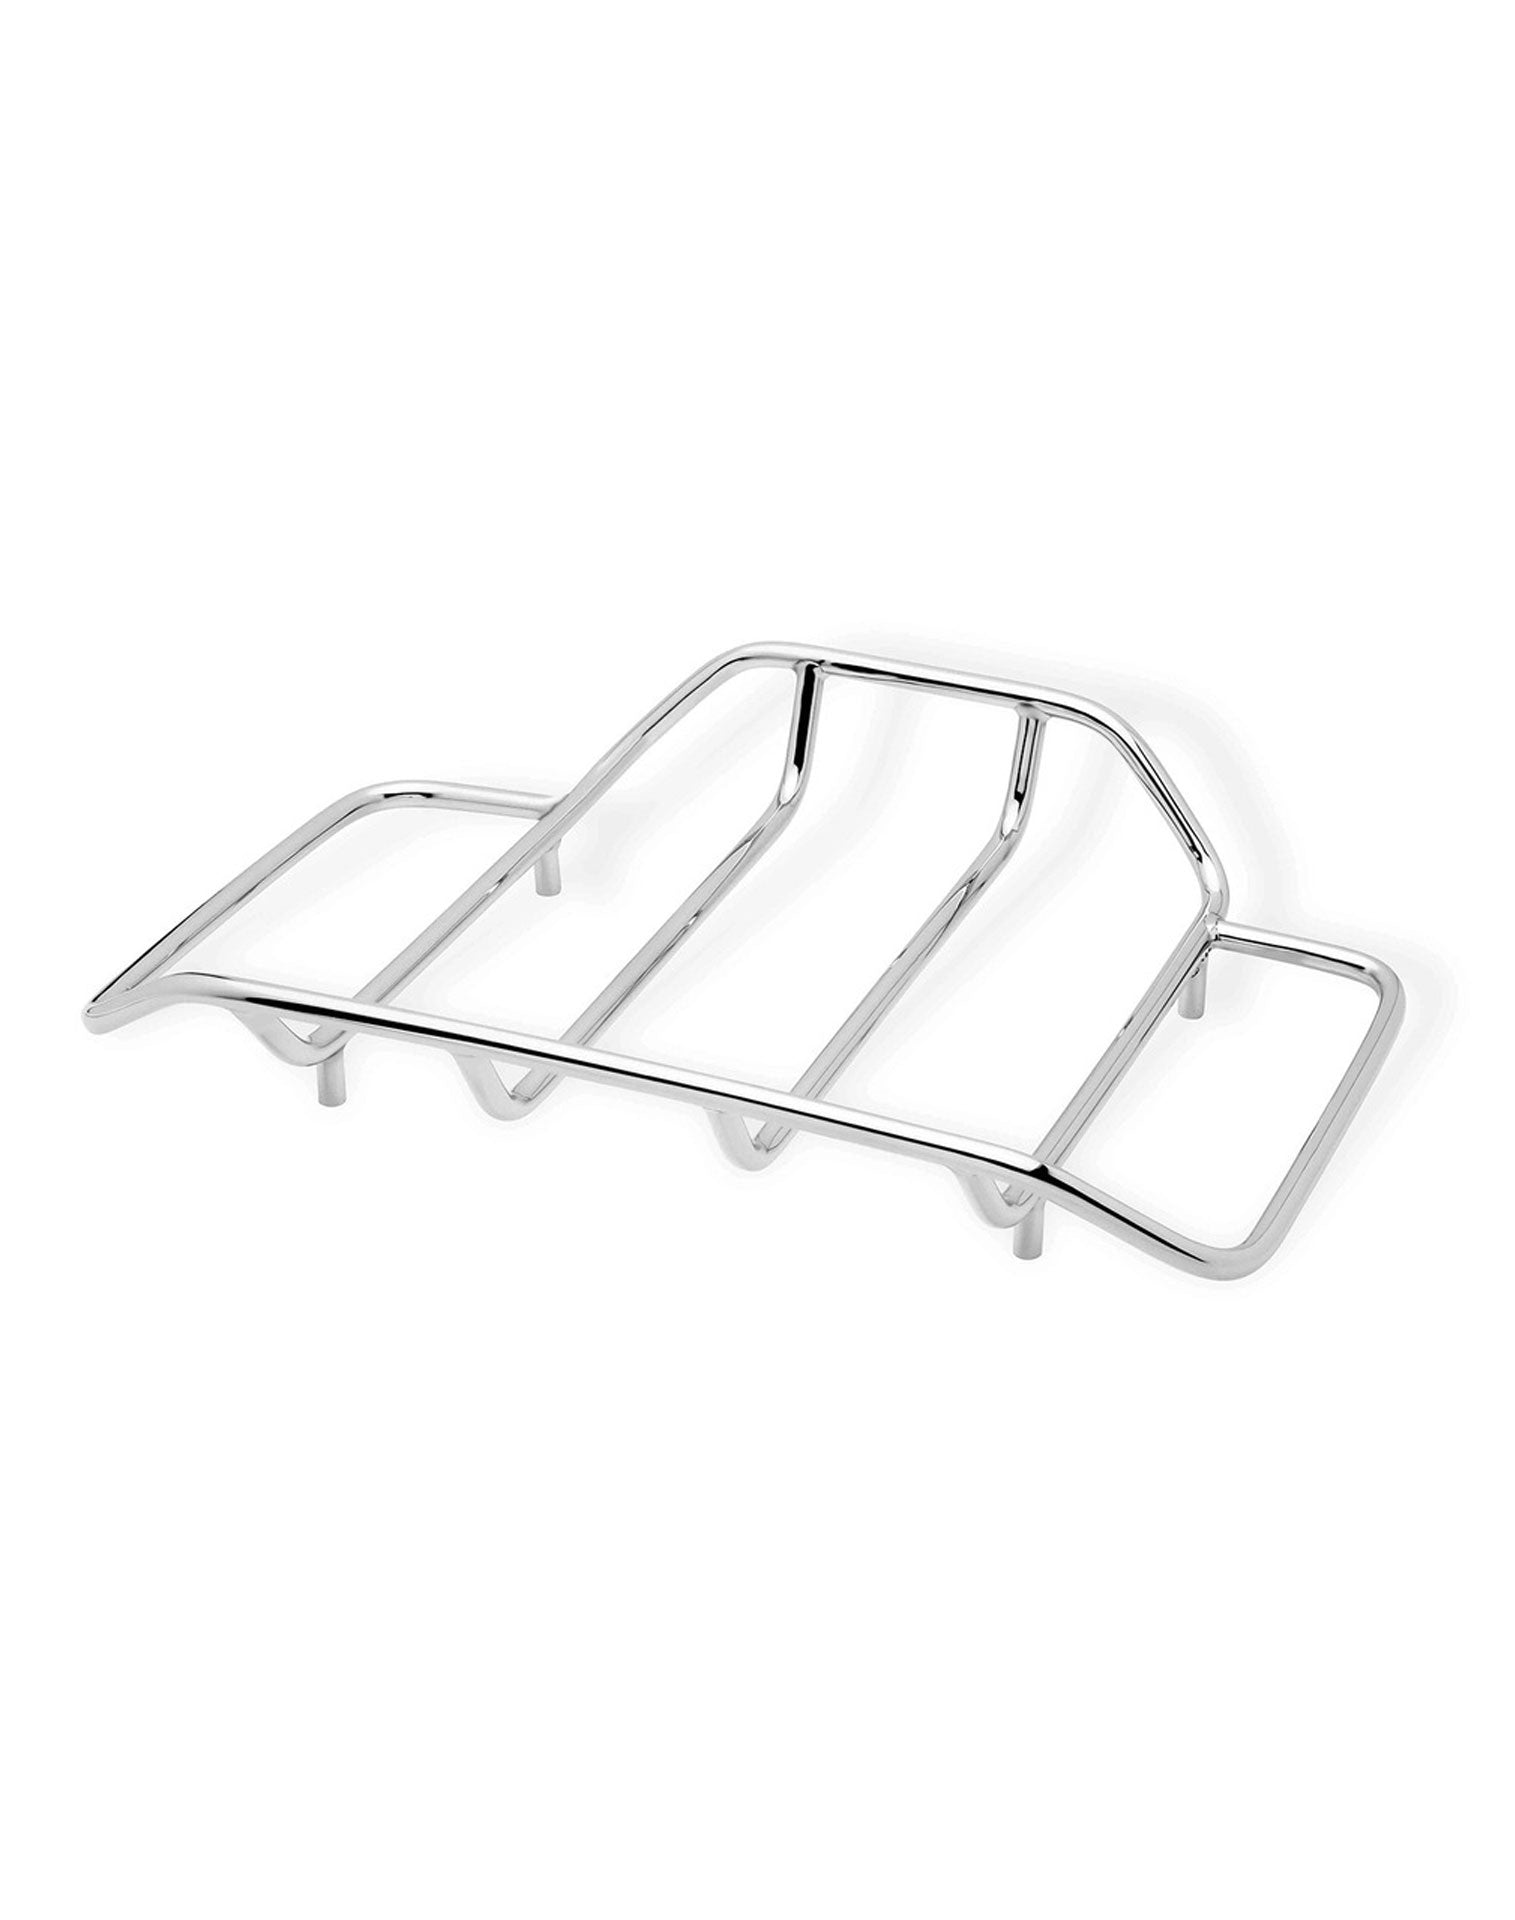 Viking Voyage Tour Pack Luggage Rack for Harley Electra Glide Chrome Side View